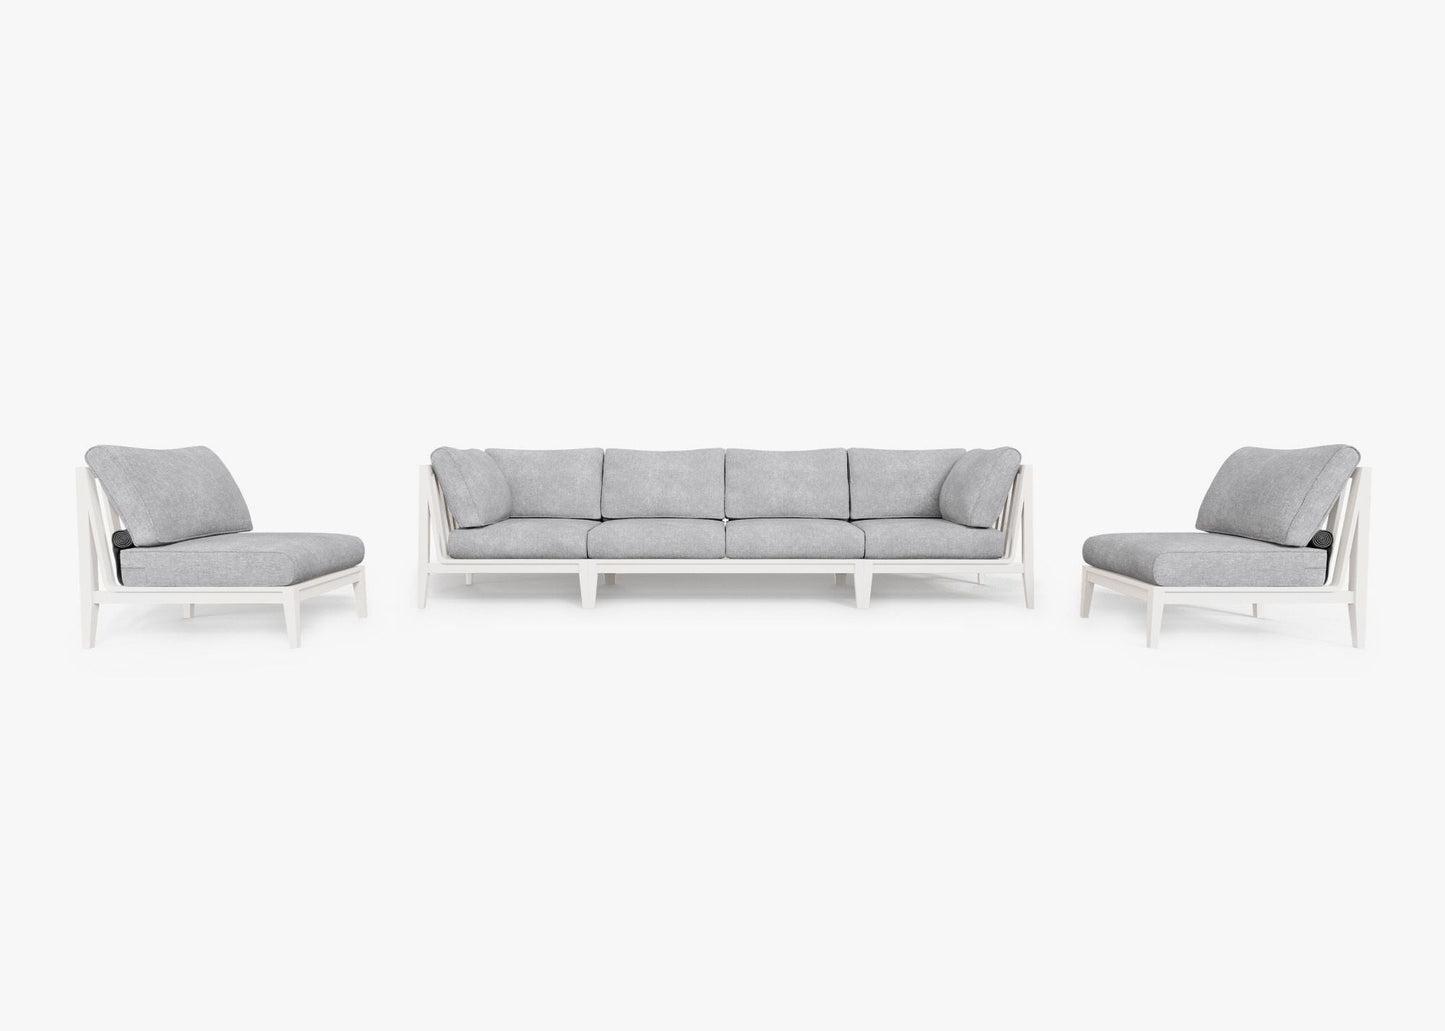 Live Outer 127" White Aluminum Outdoor Sofa With Armless Chairs and Pacific Fog Gray Cushion (6-Seat)